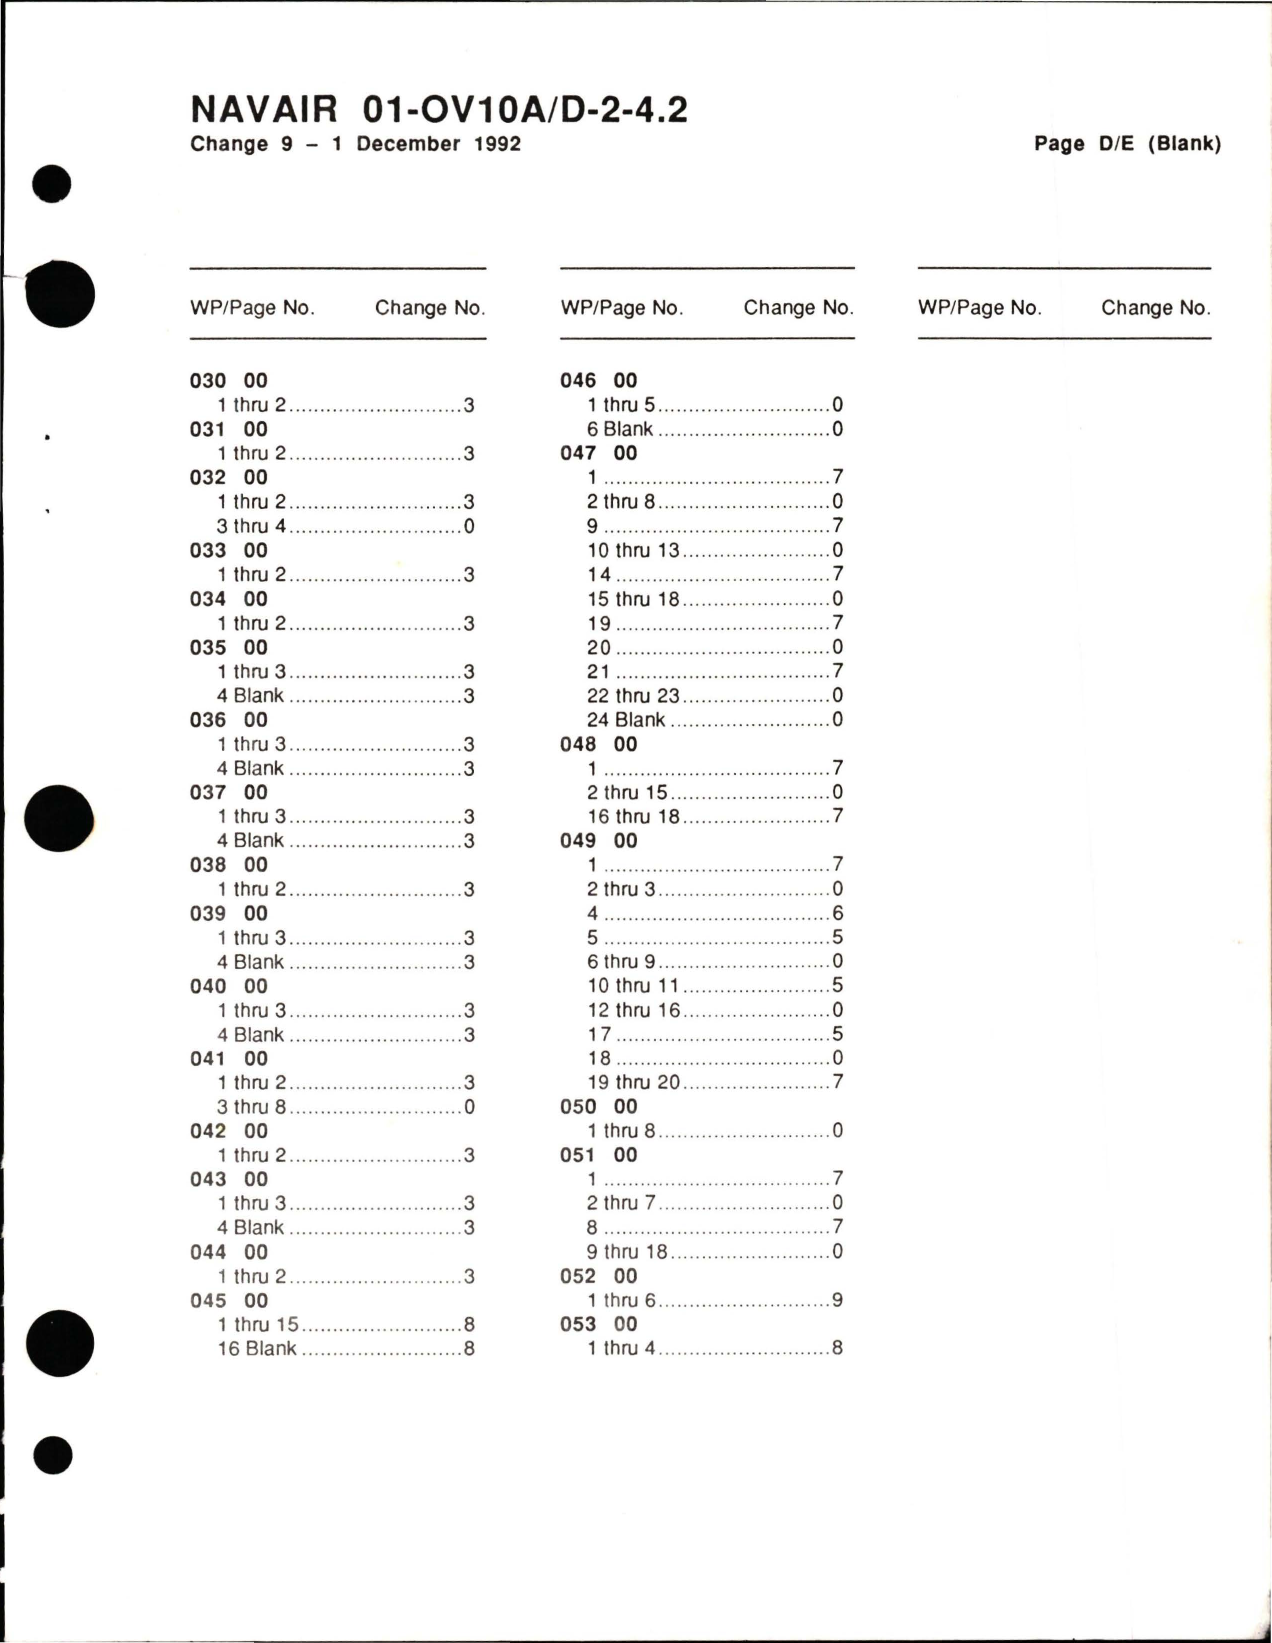 Sample page 5 from AirCorps Library document: Organizational Maintenance with Illustrated Parts Breakdown for Fuel Systems on OV-10A and OV-10D 